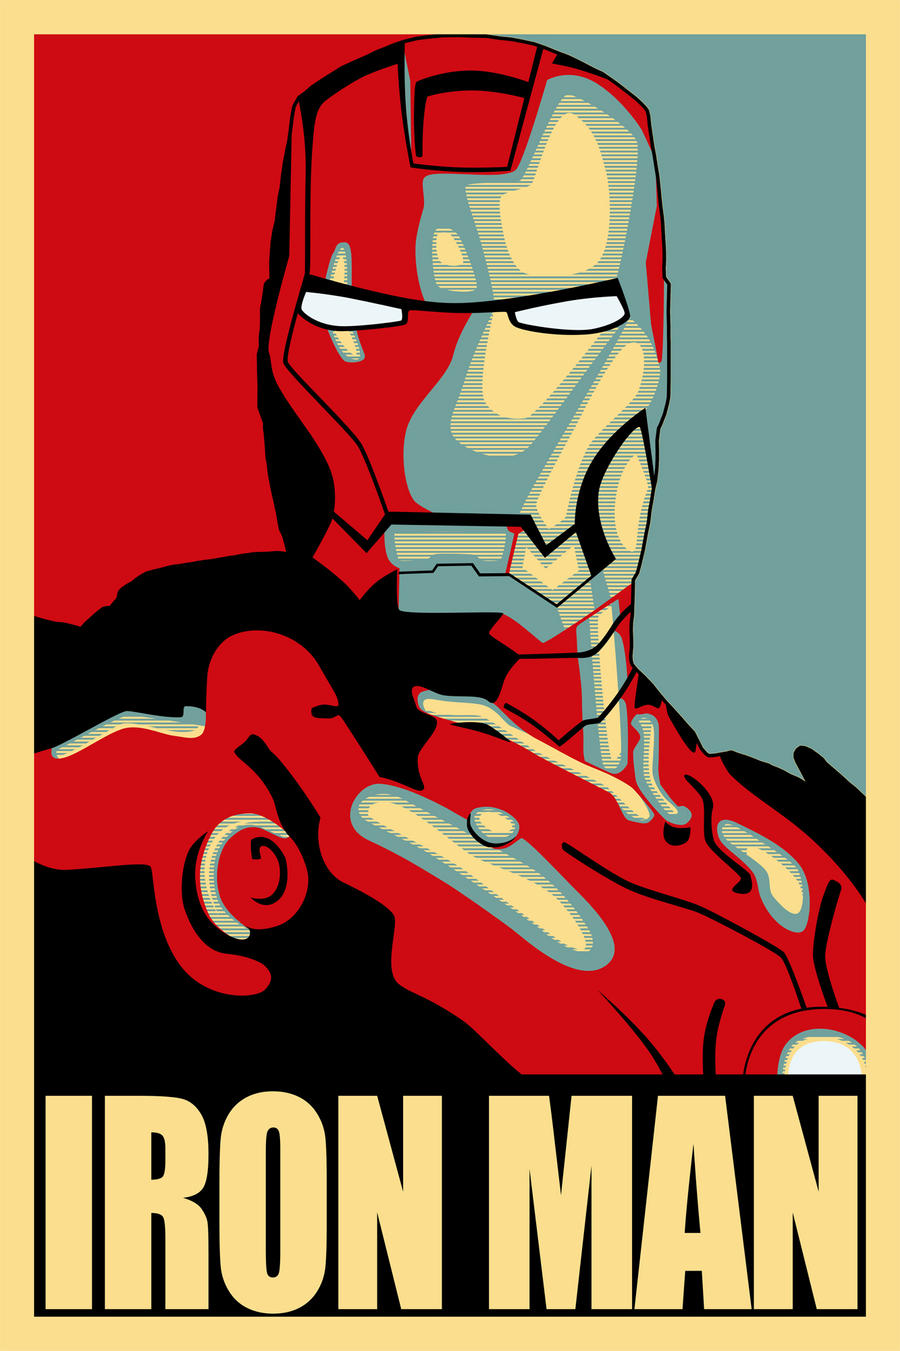 Iron Man Update by goody-2-shoes on DeviantArt